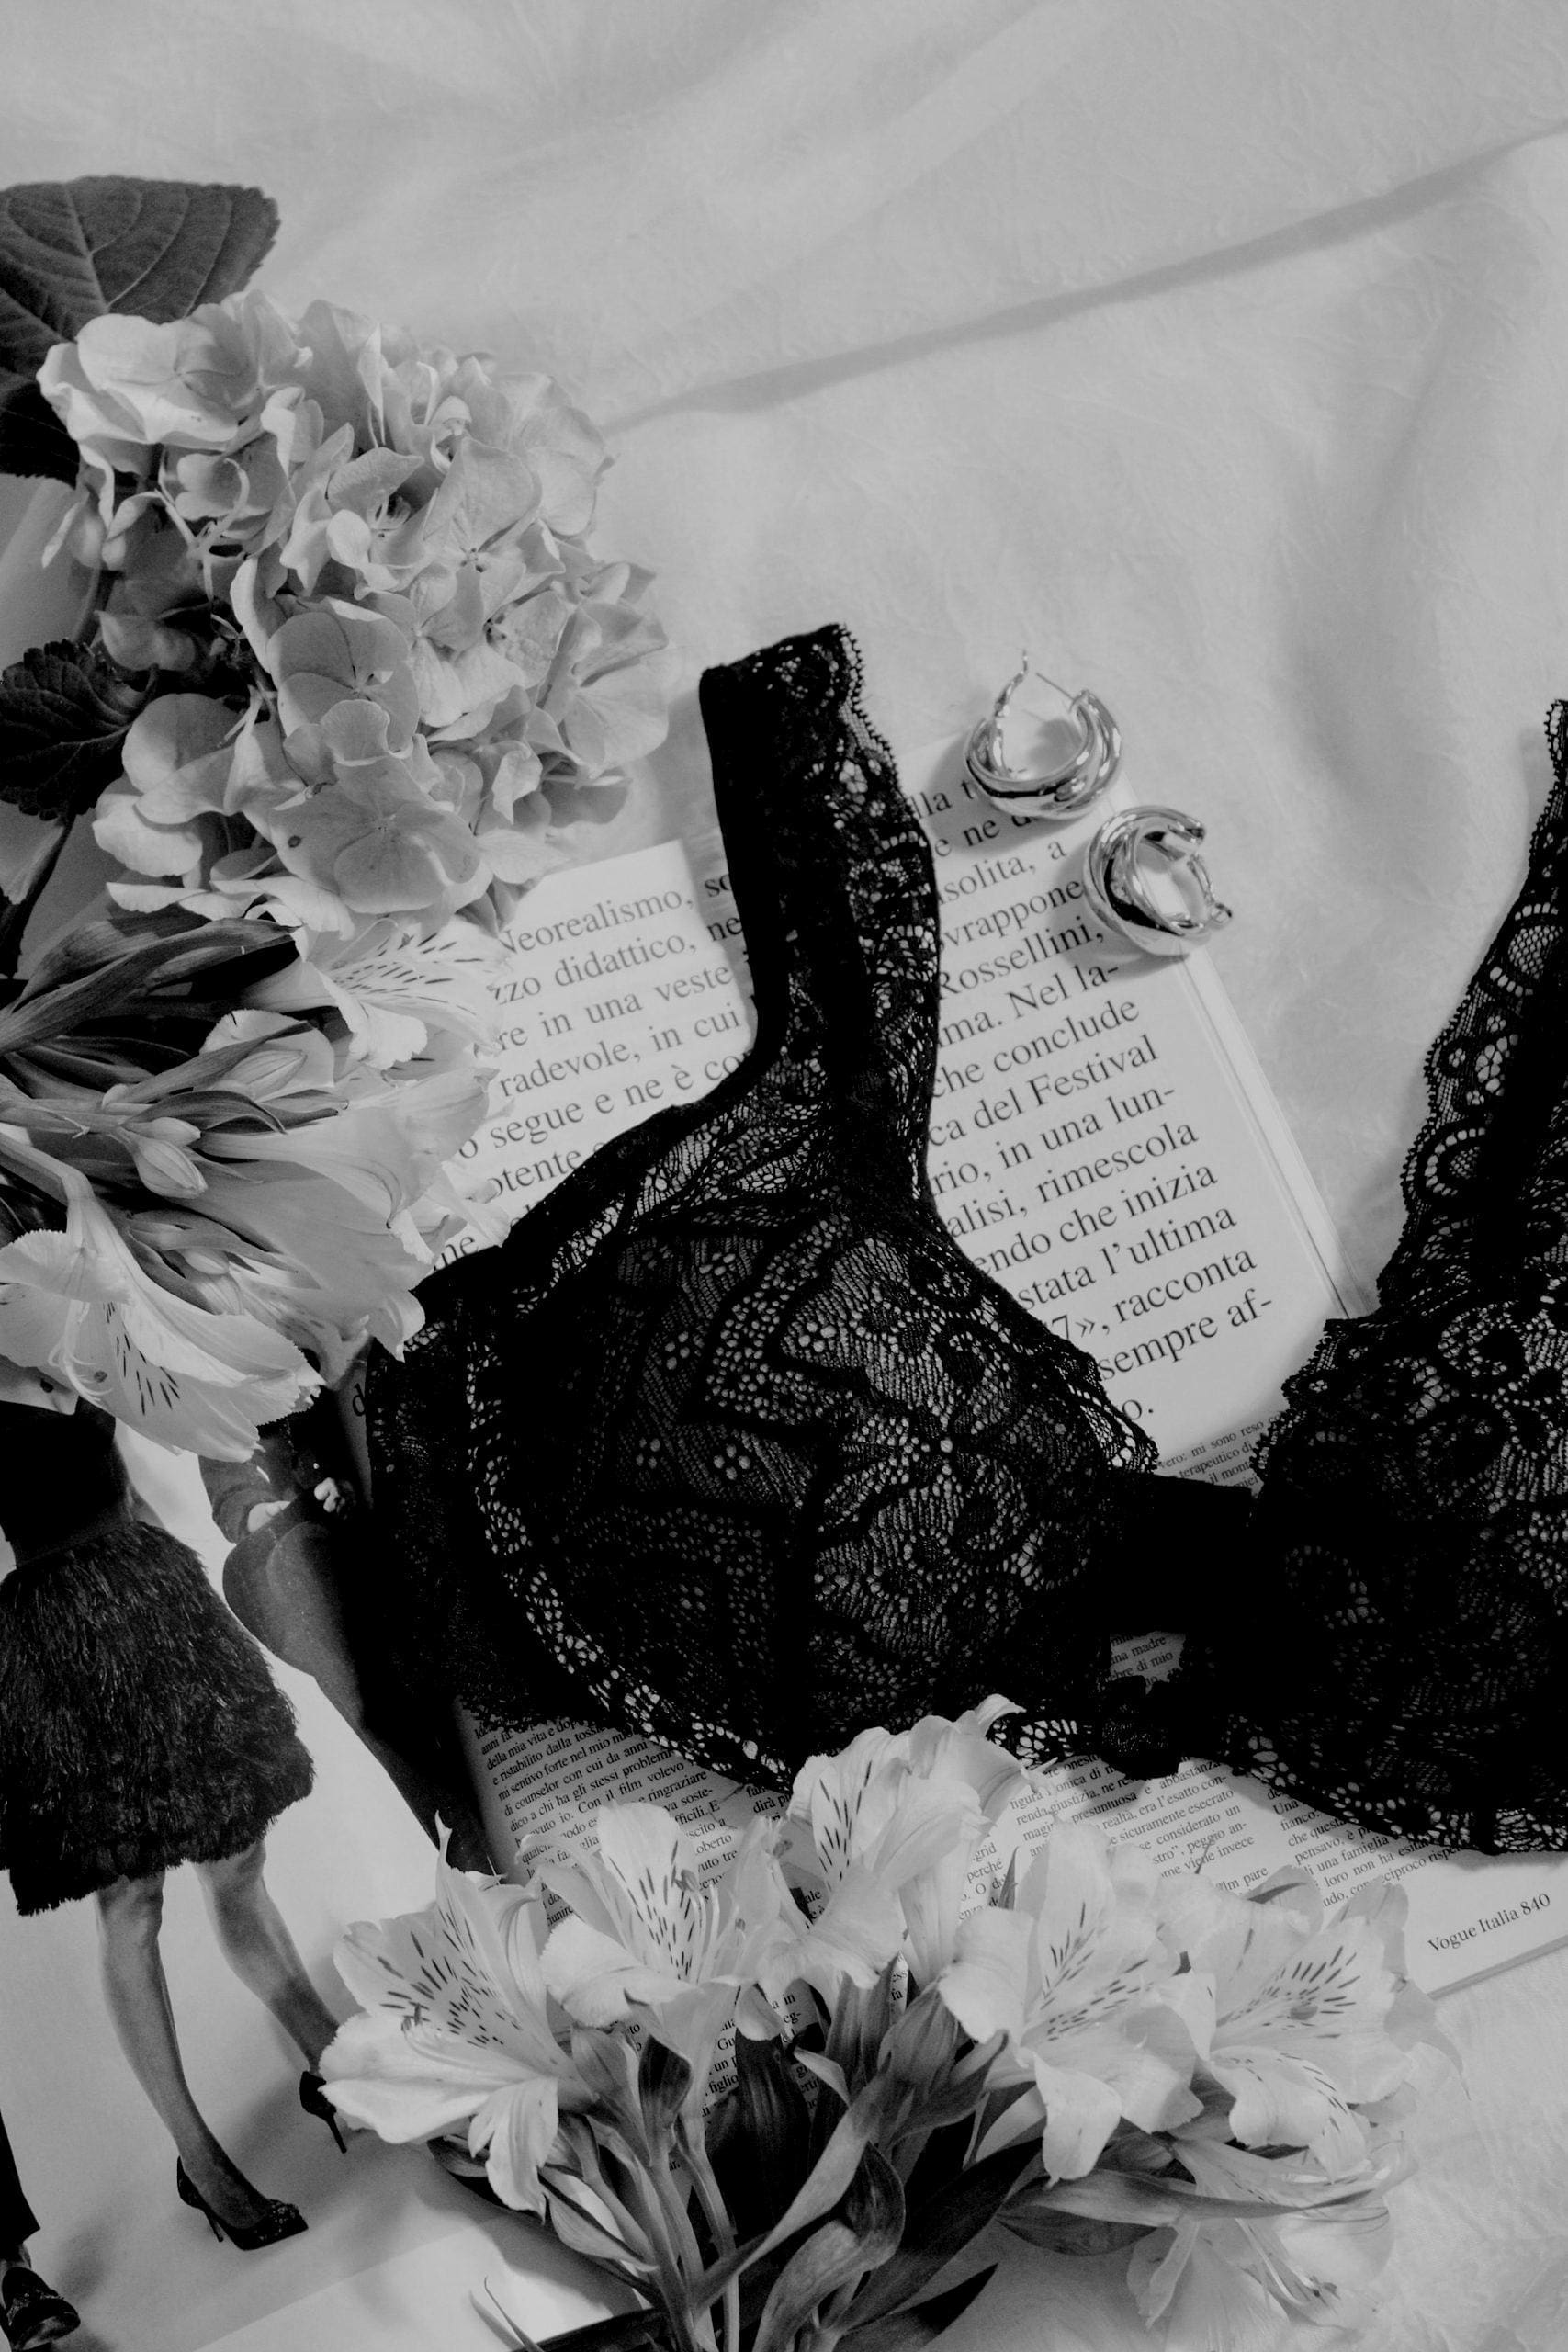 A woman shopping for bras in a store photo – Black friday Image on Unsplash